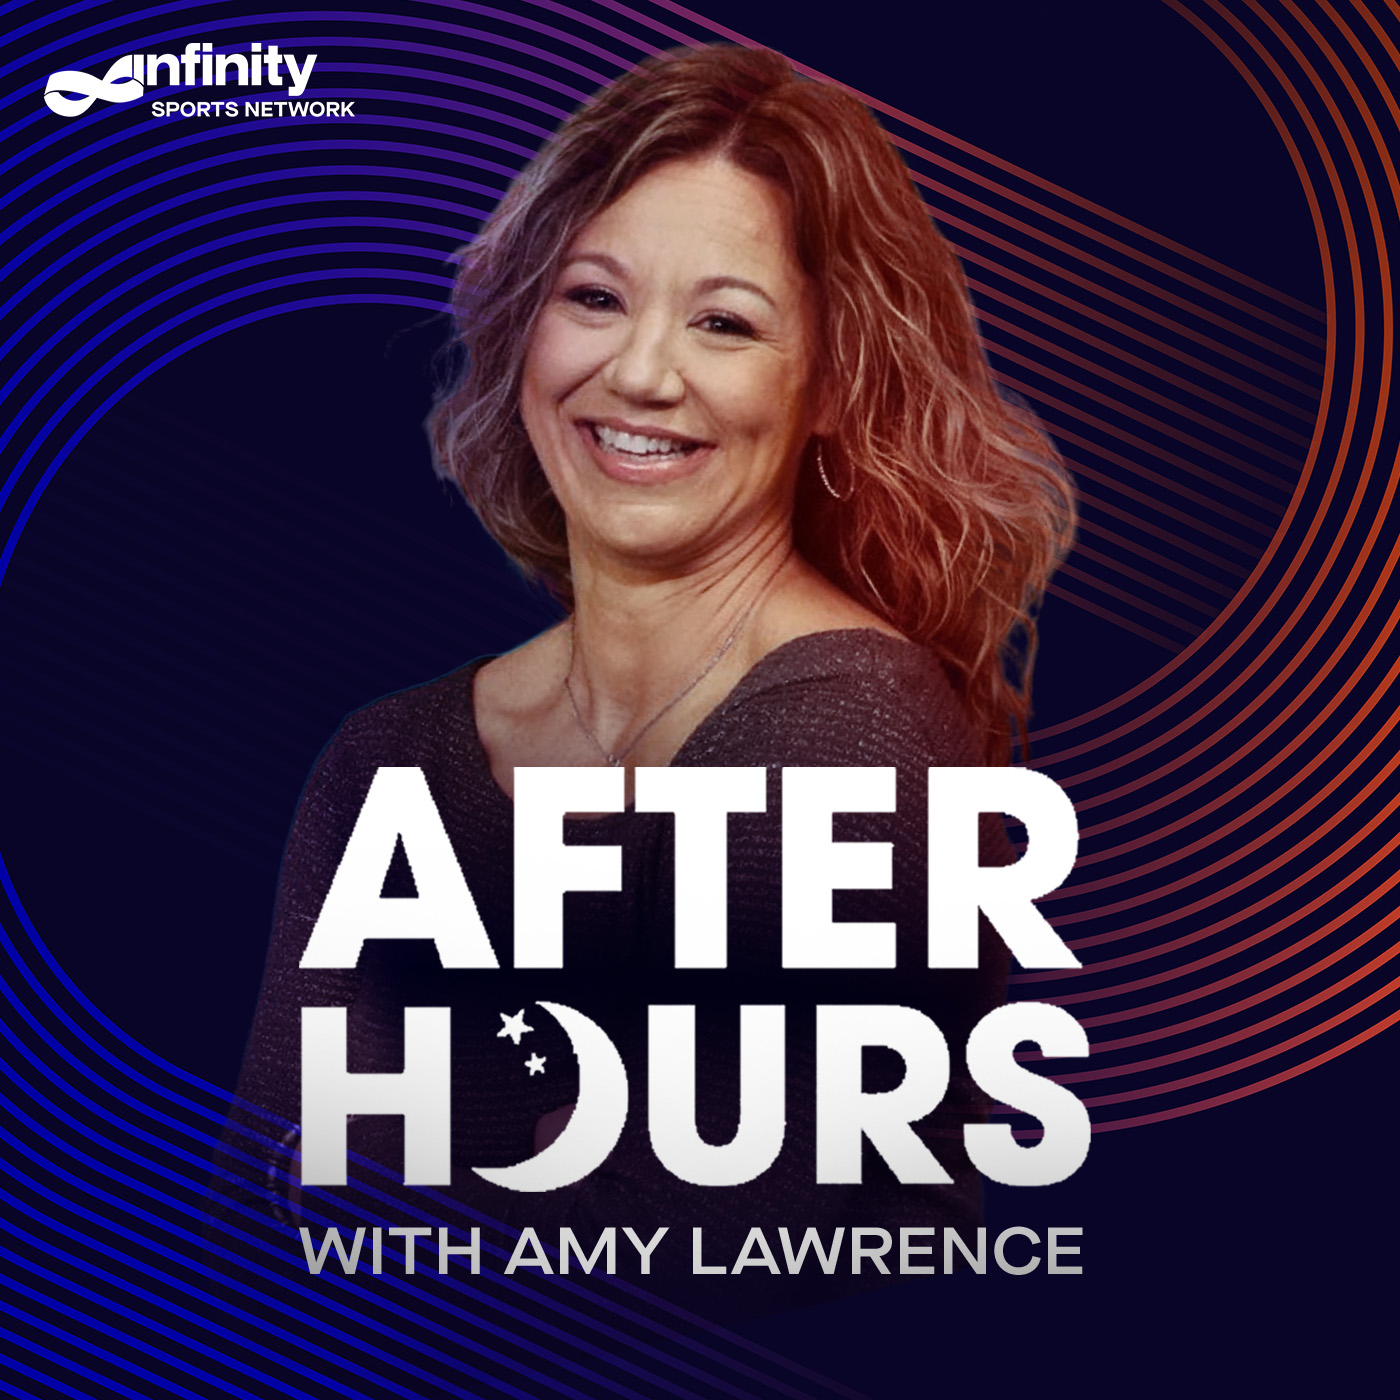 5/11/21 After Hours with Amy Lawrence PODCAST: Hour 3